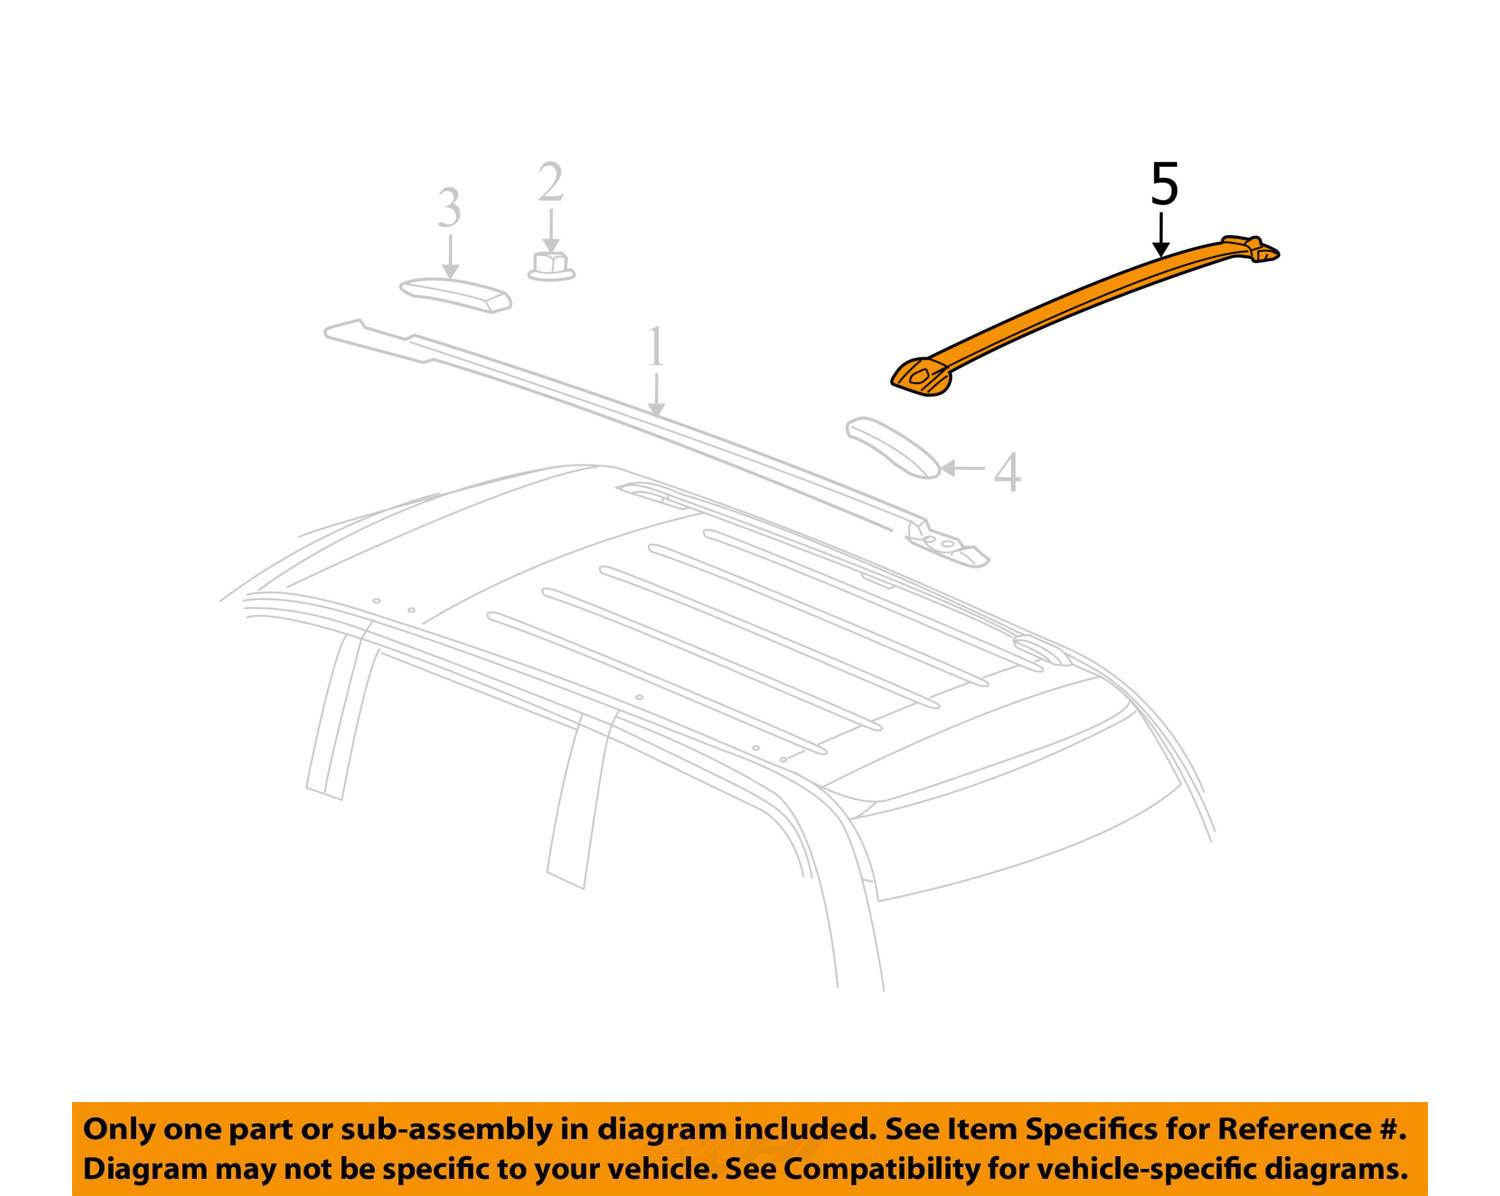 2015 Chrysler Town And Country Roof Rack Instructions